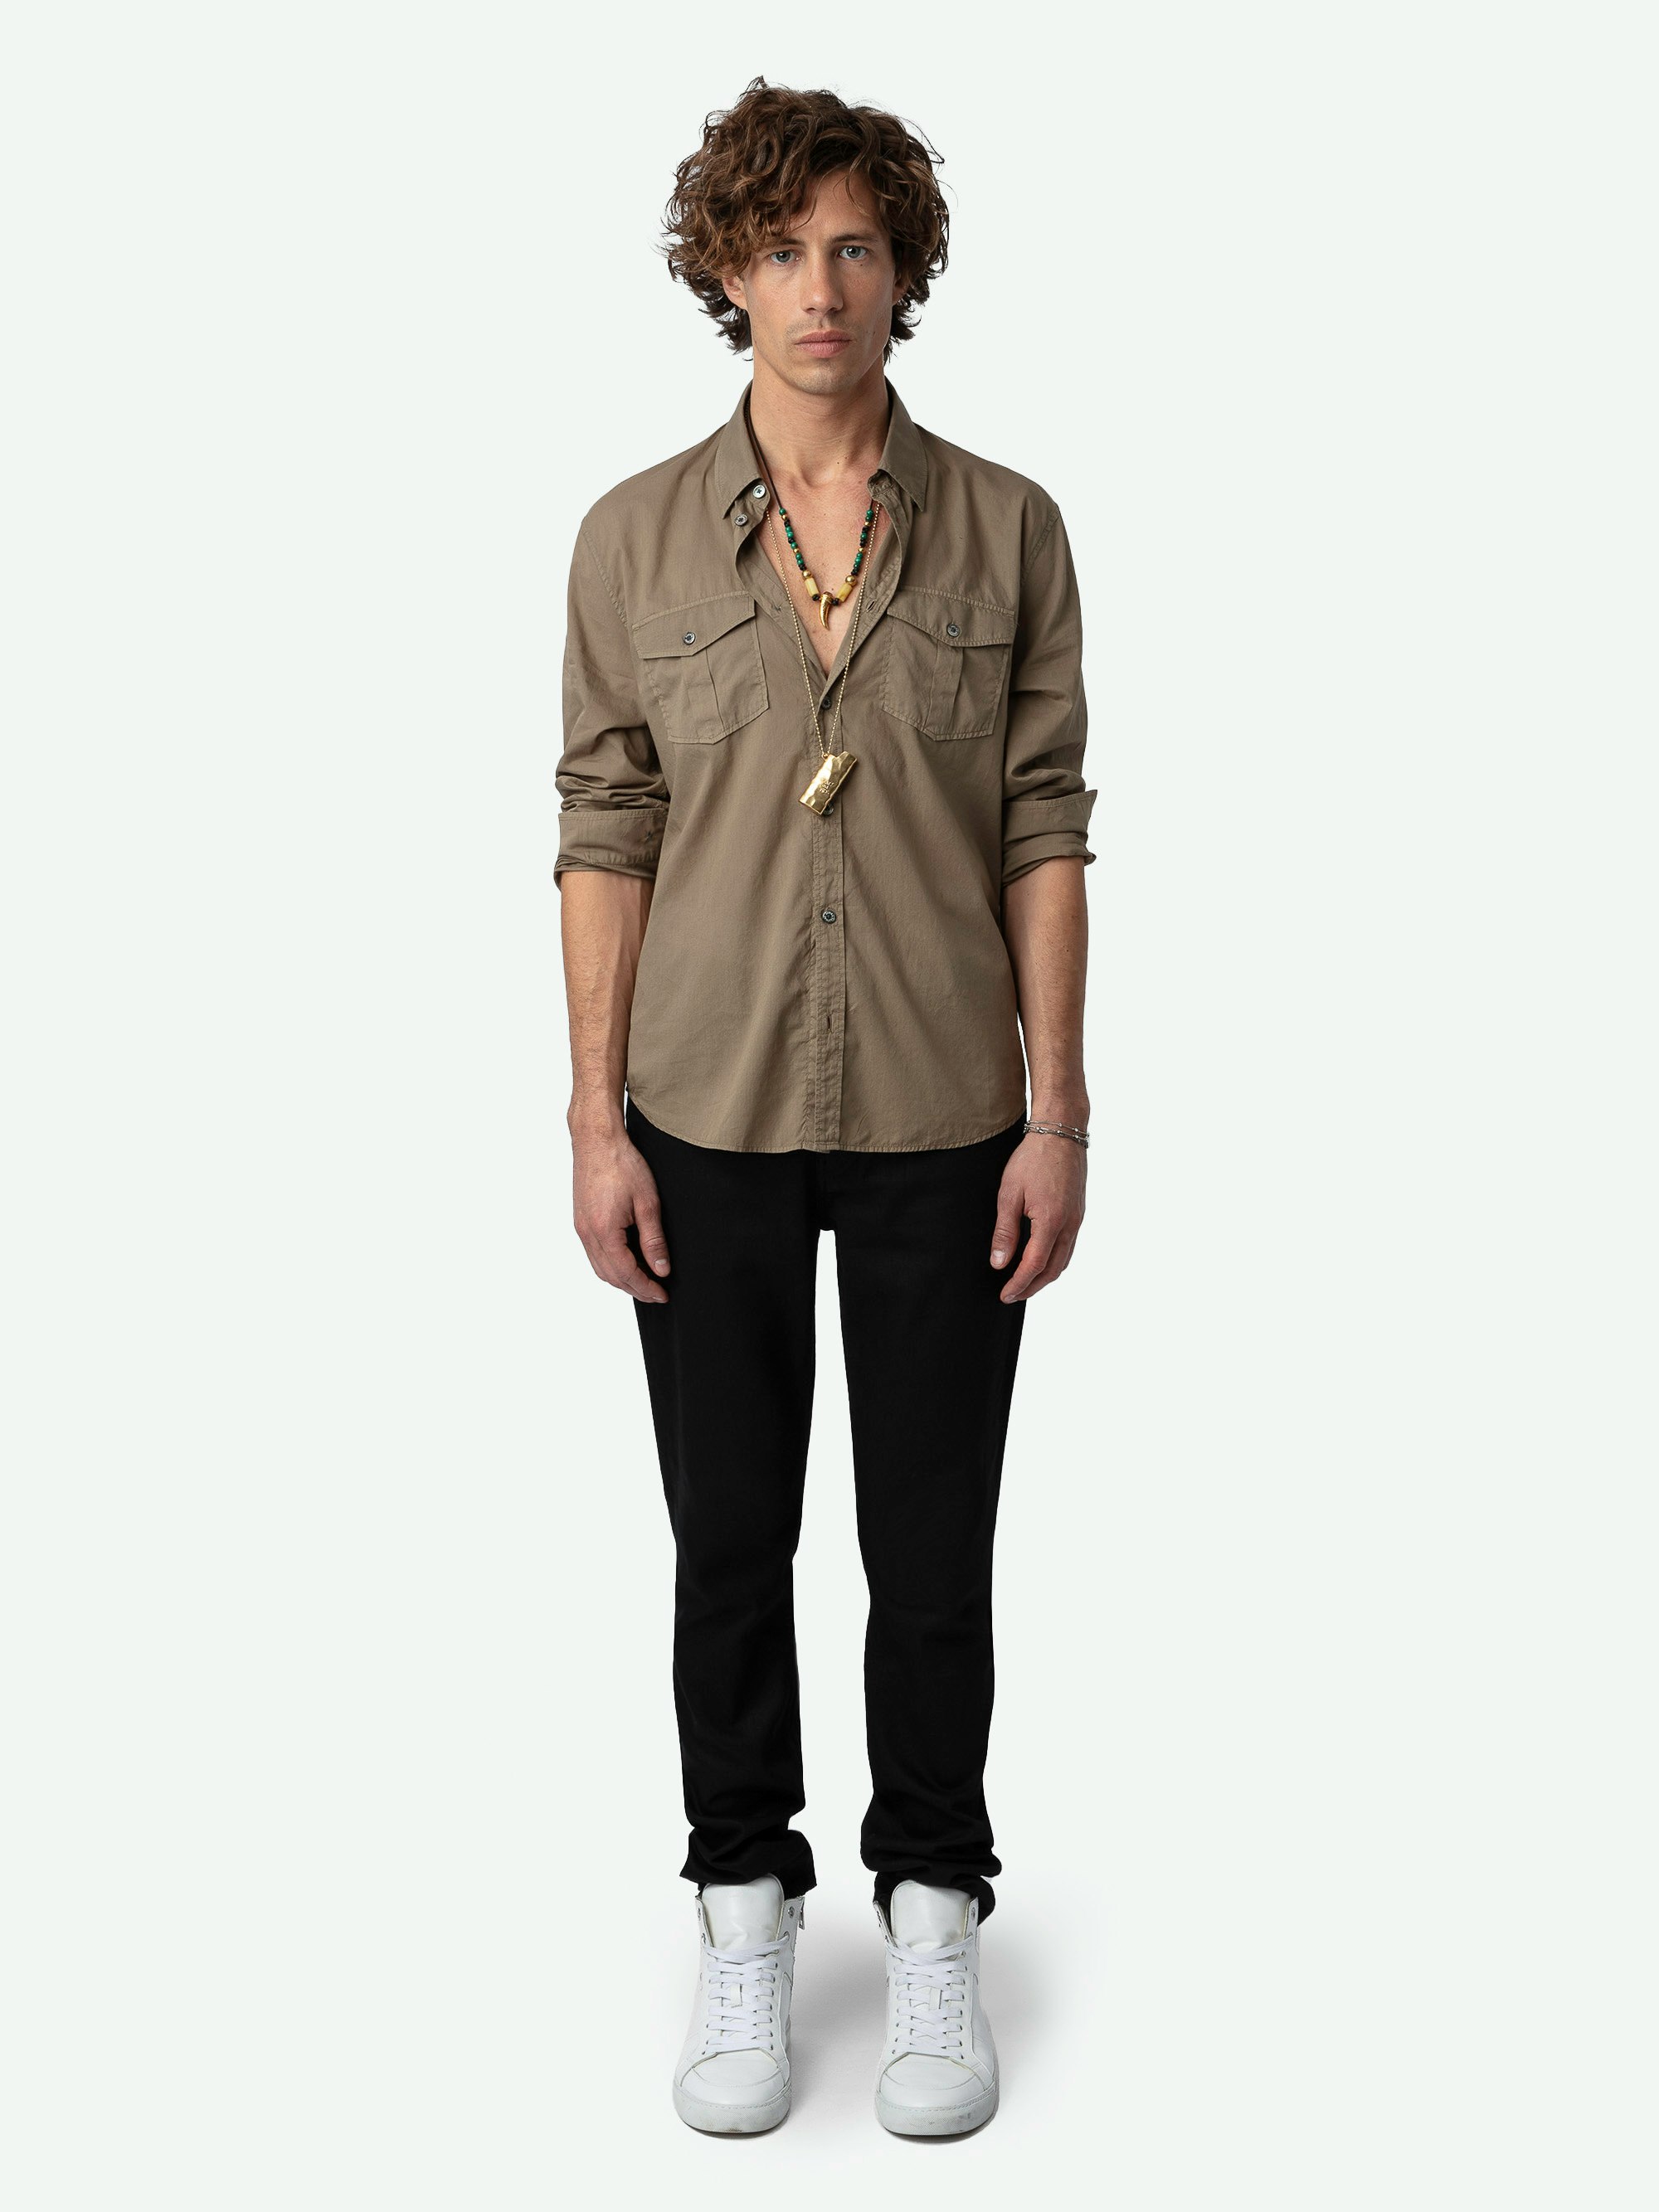 Thibault Shirt - Long-sleeved cotton voile shirt with pockets.